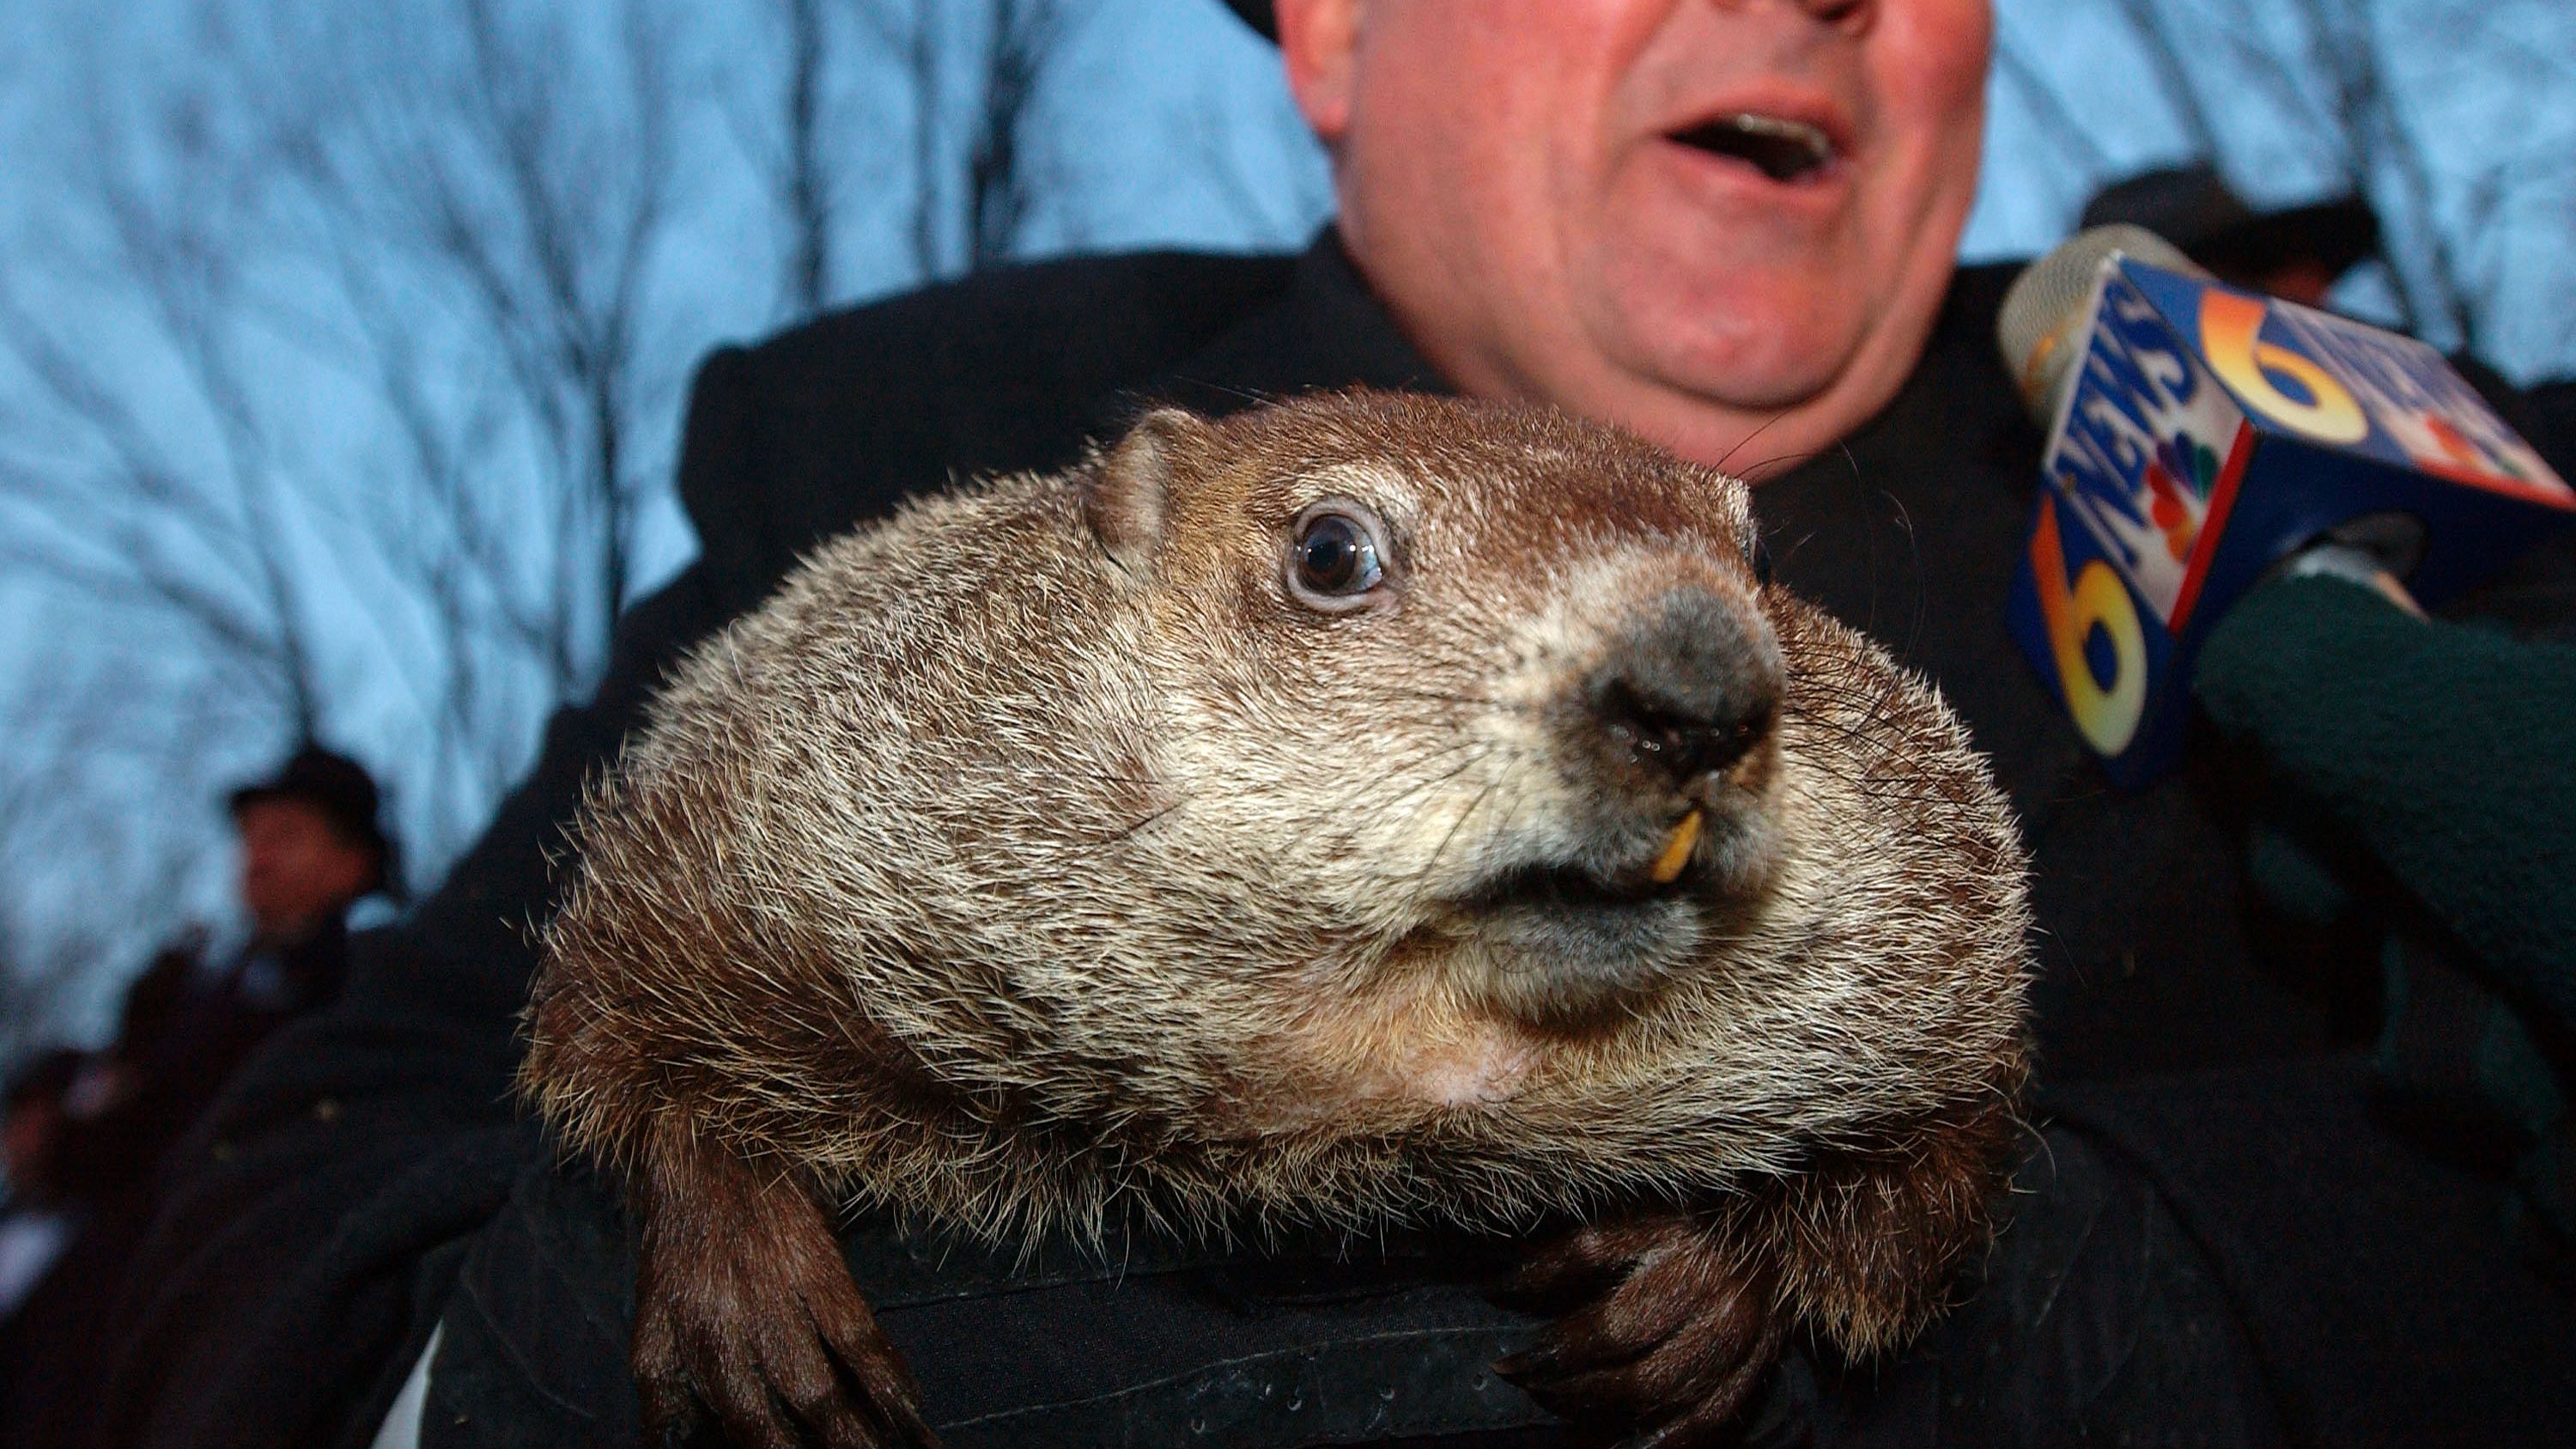 It's Groundhog Day, so here’s the real dirt on your weather forecaster